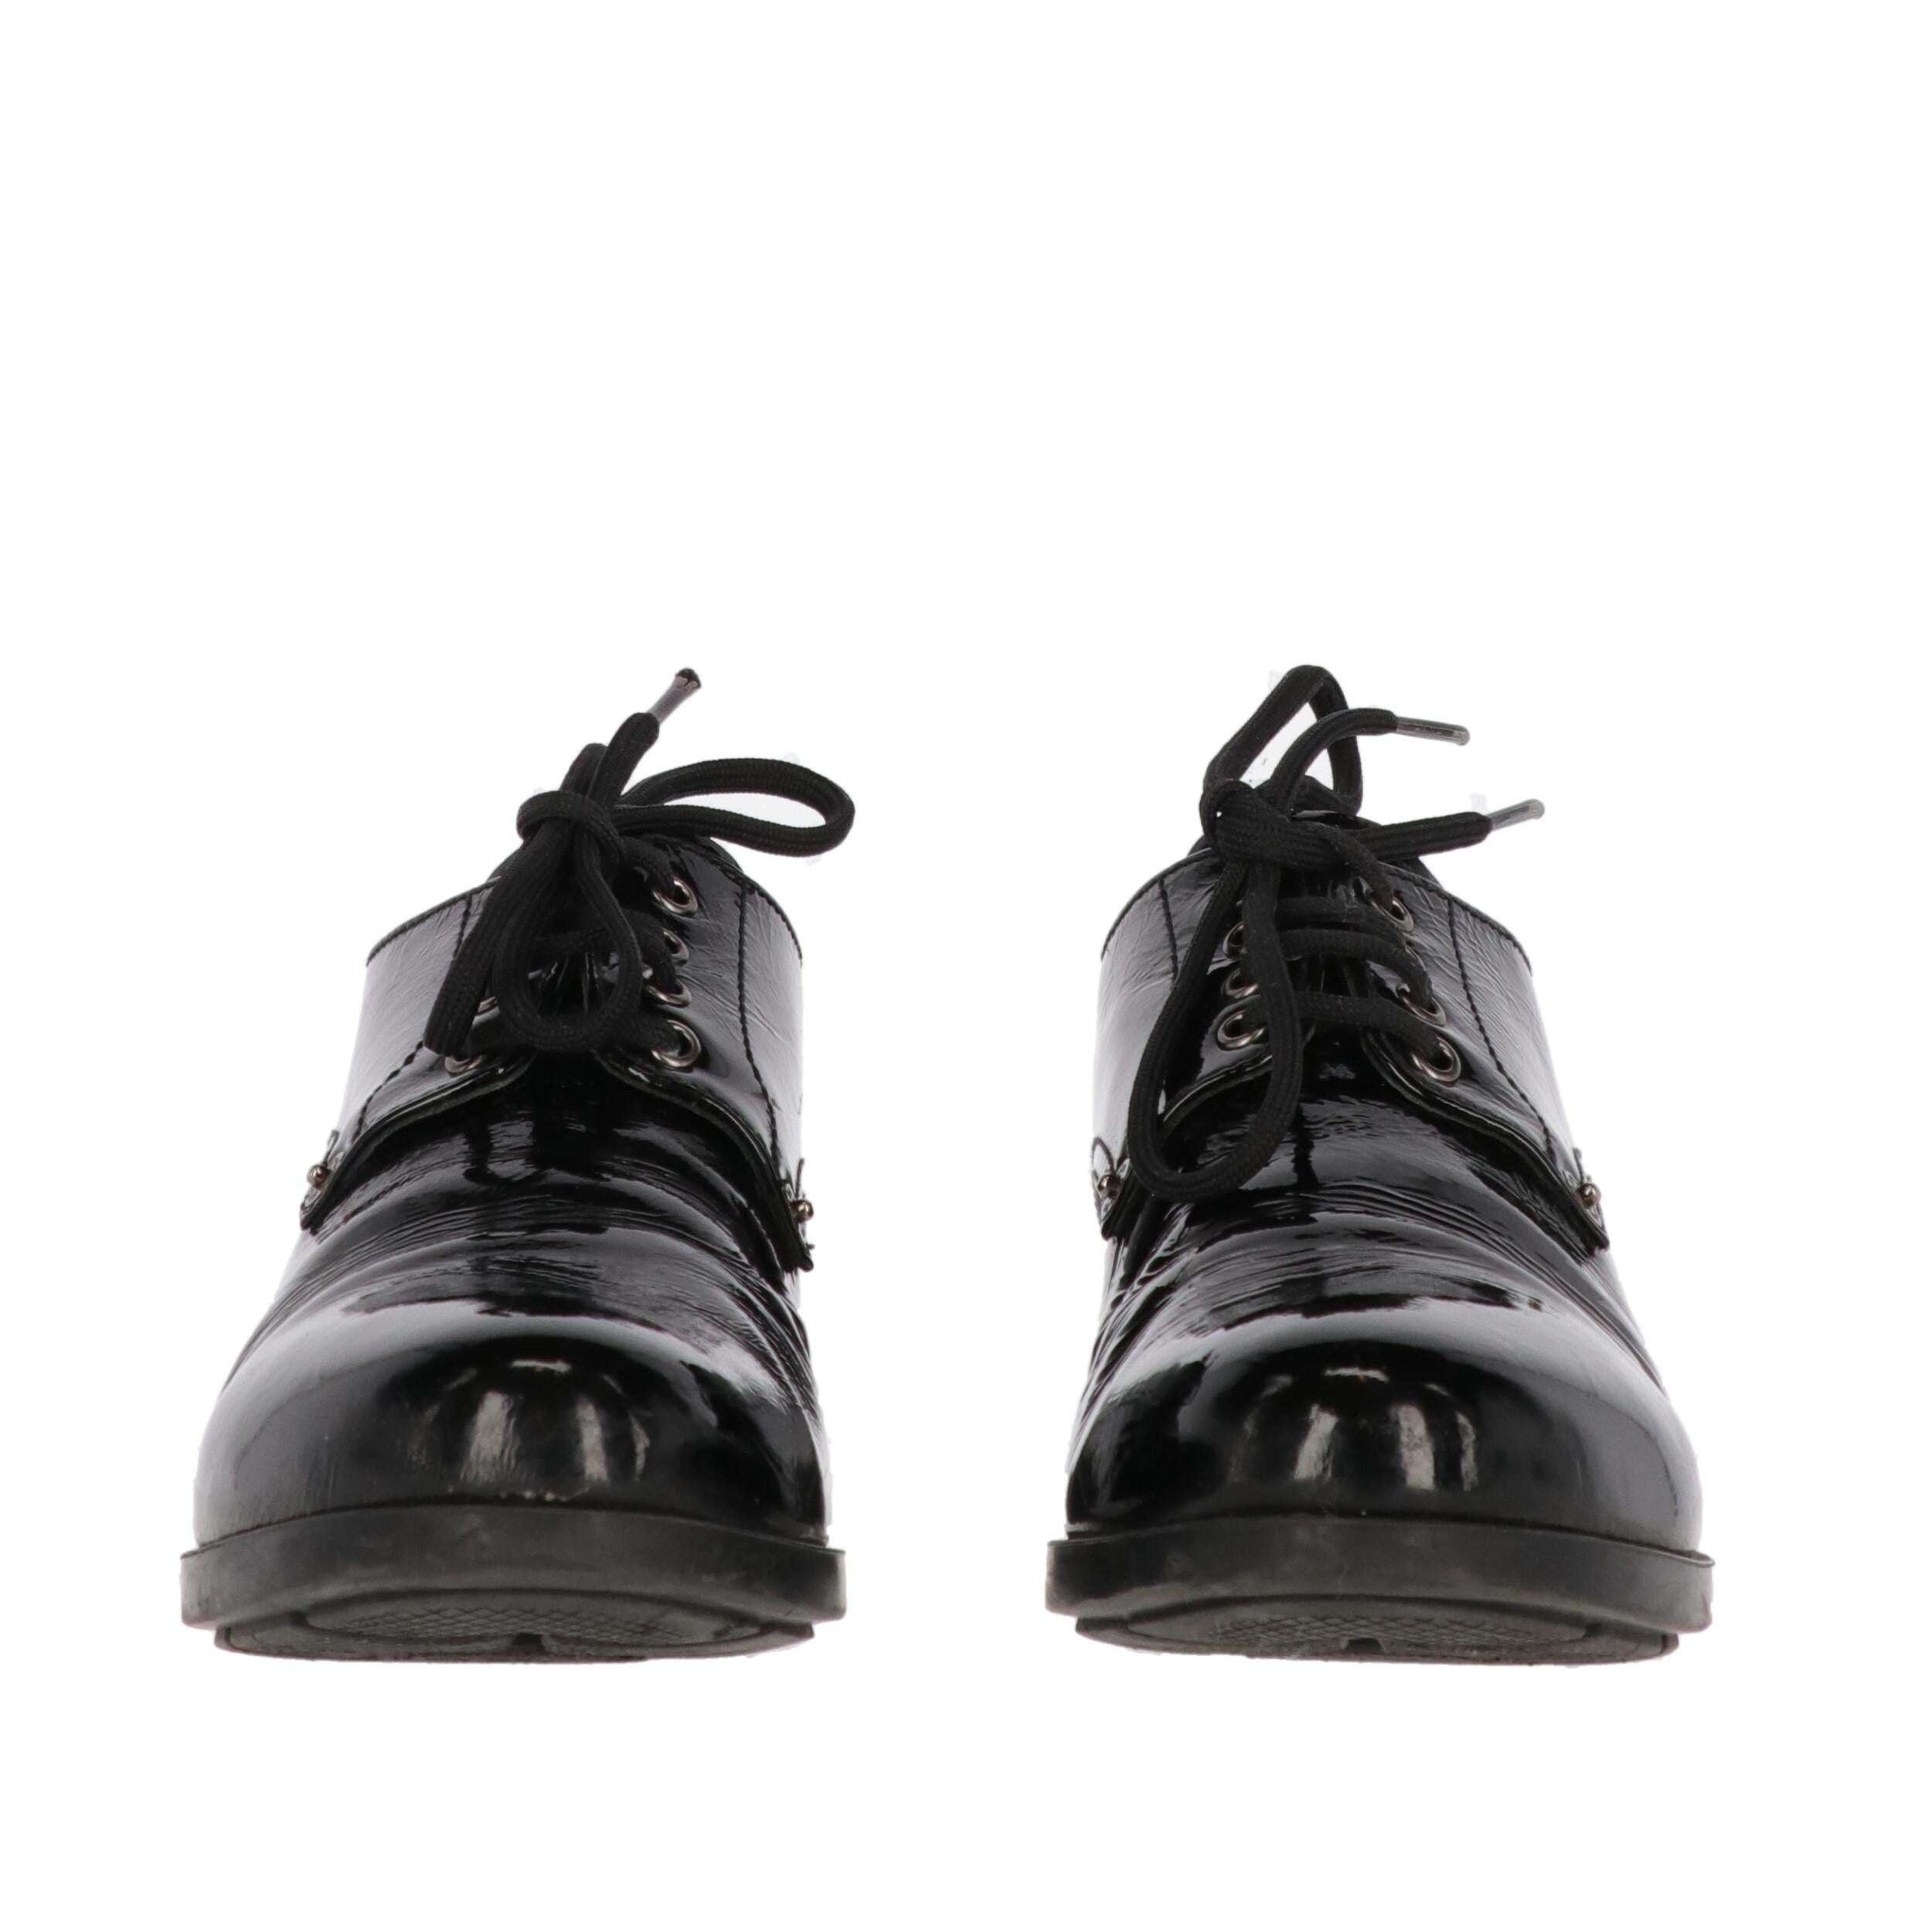 Black 1990s Prada Leather Lace-up Shoes